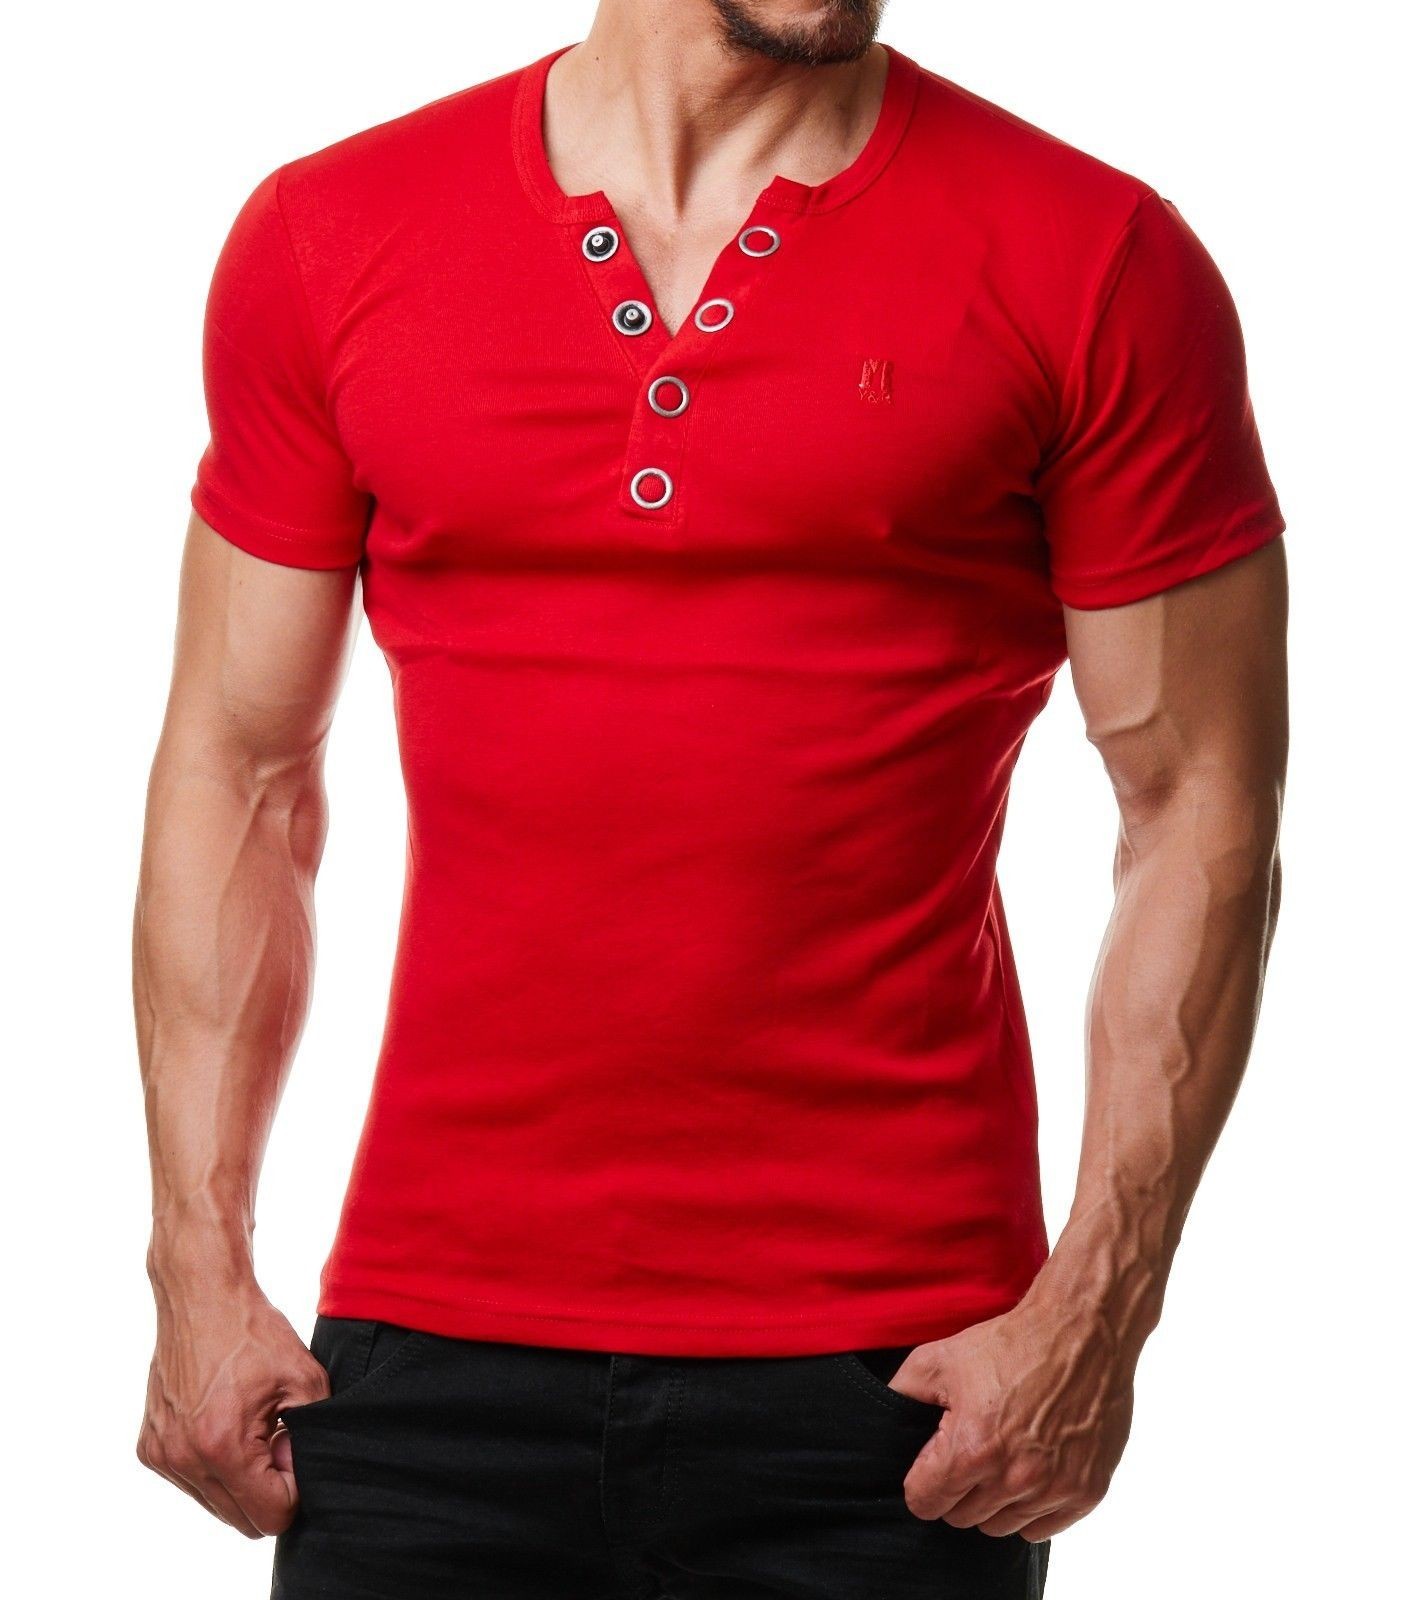 Buy t shirt rouge - 56% OFF!